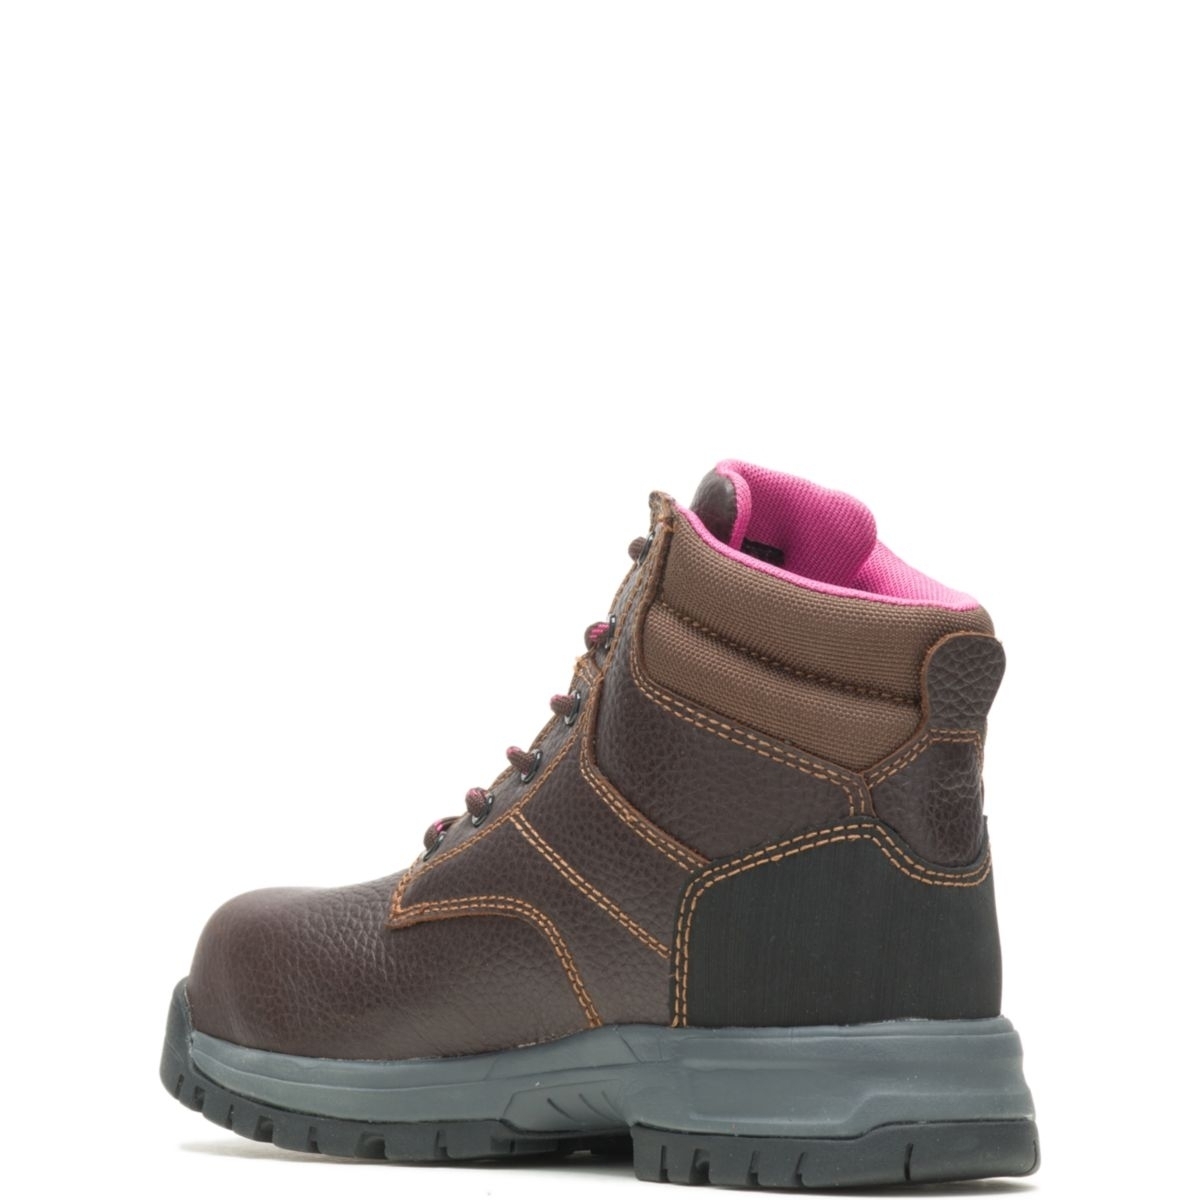 WOLVERINE Women's Piper Composite Toe Work Boot Brown - W10180 BROWN - BROWN, 5.5 Wide